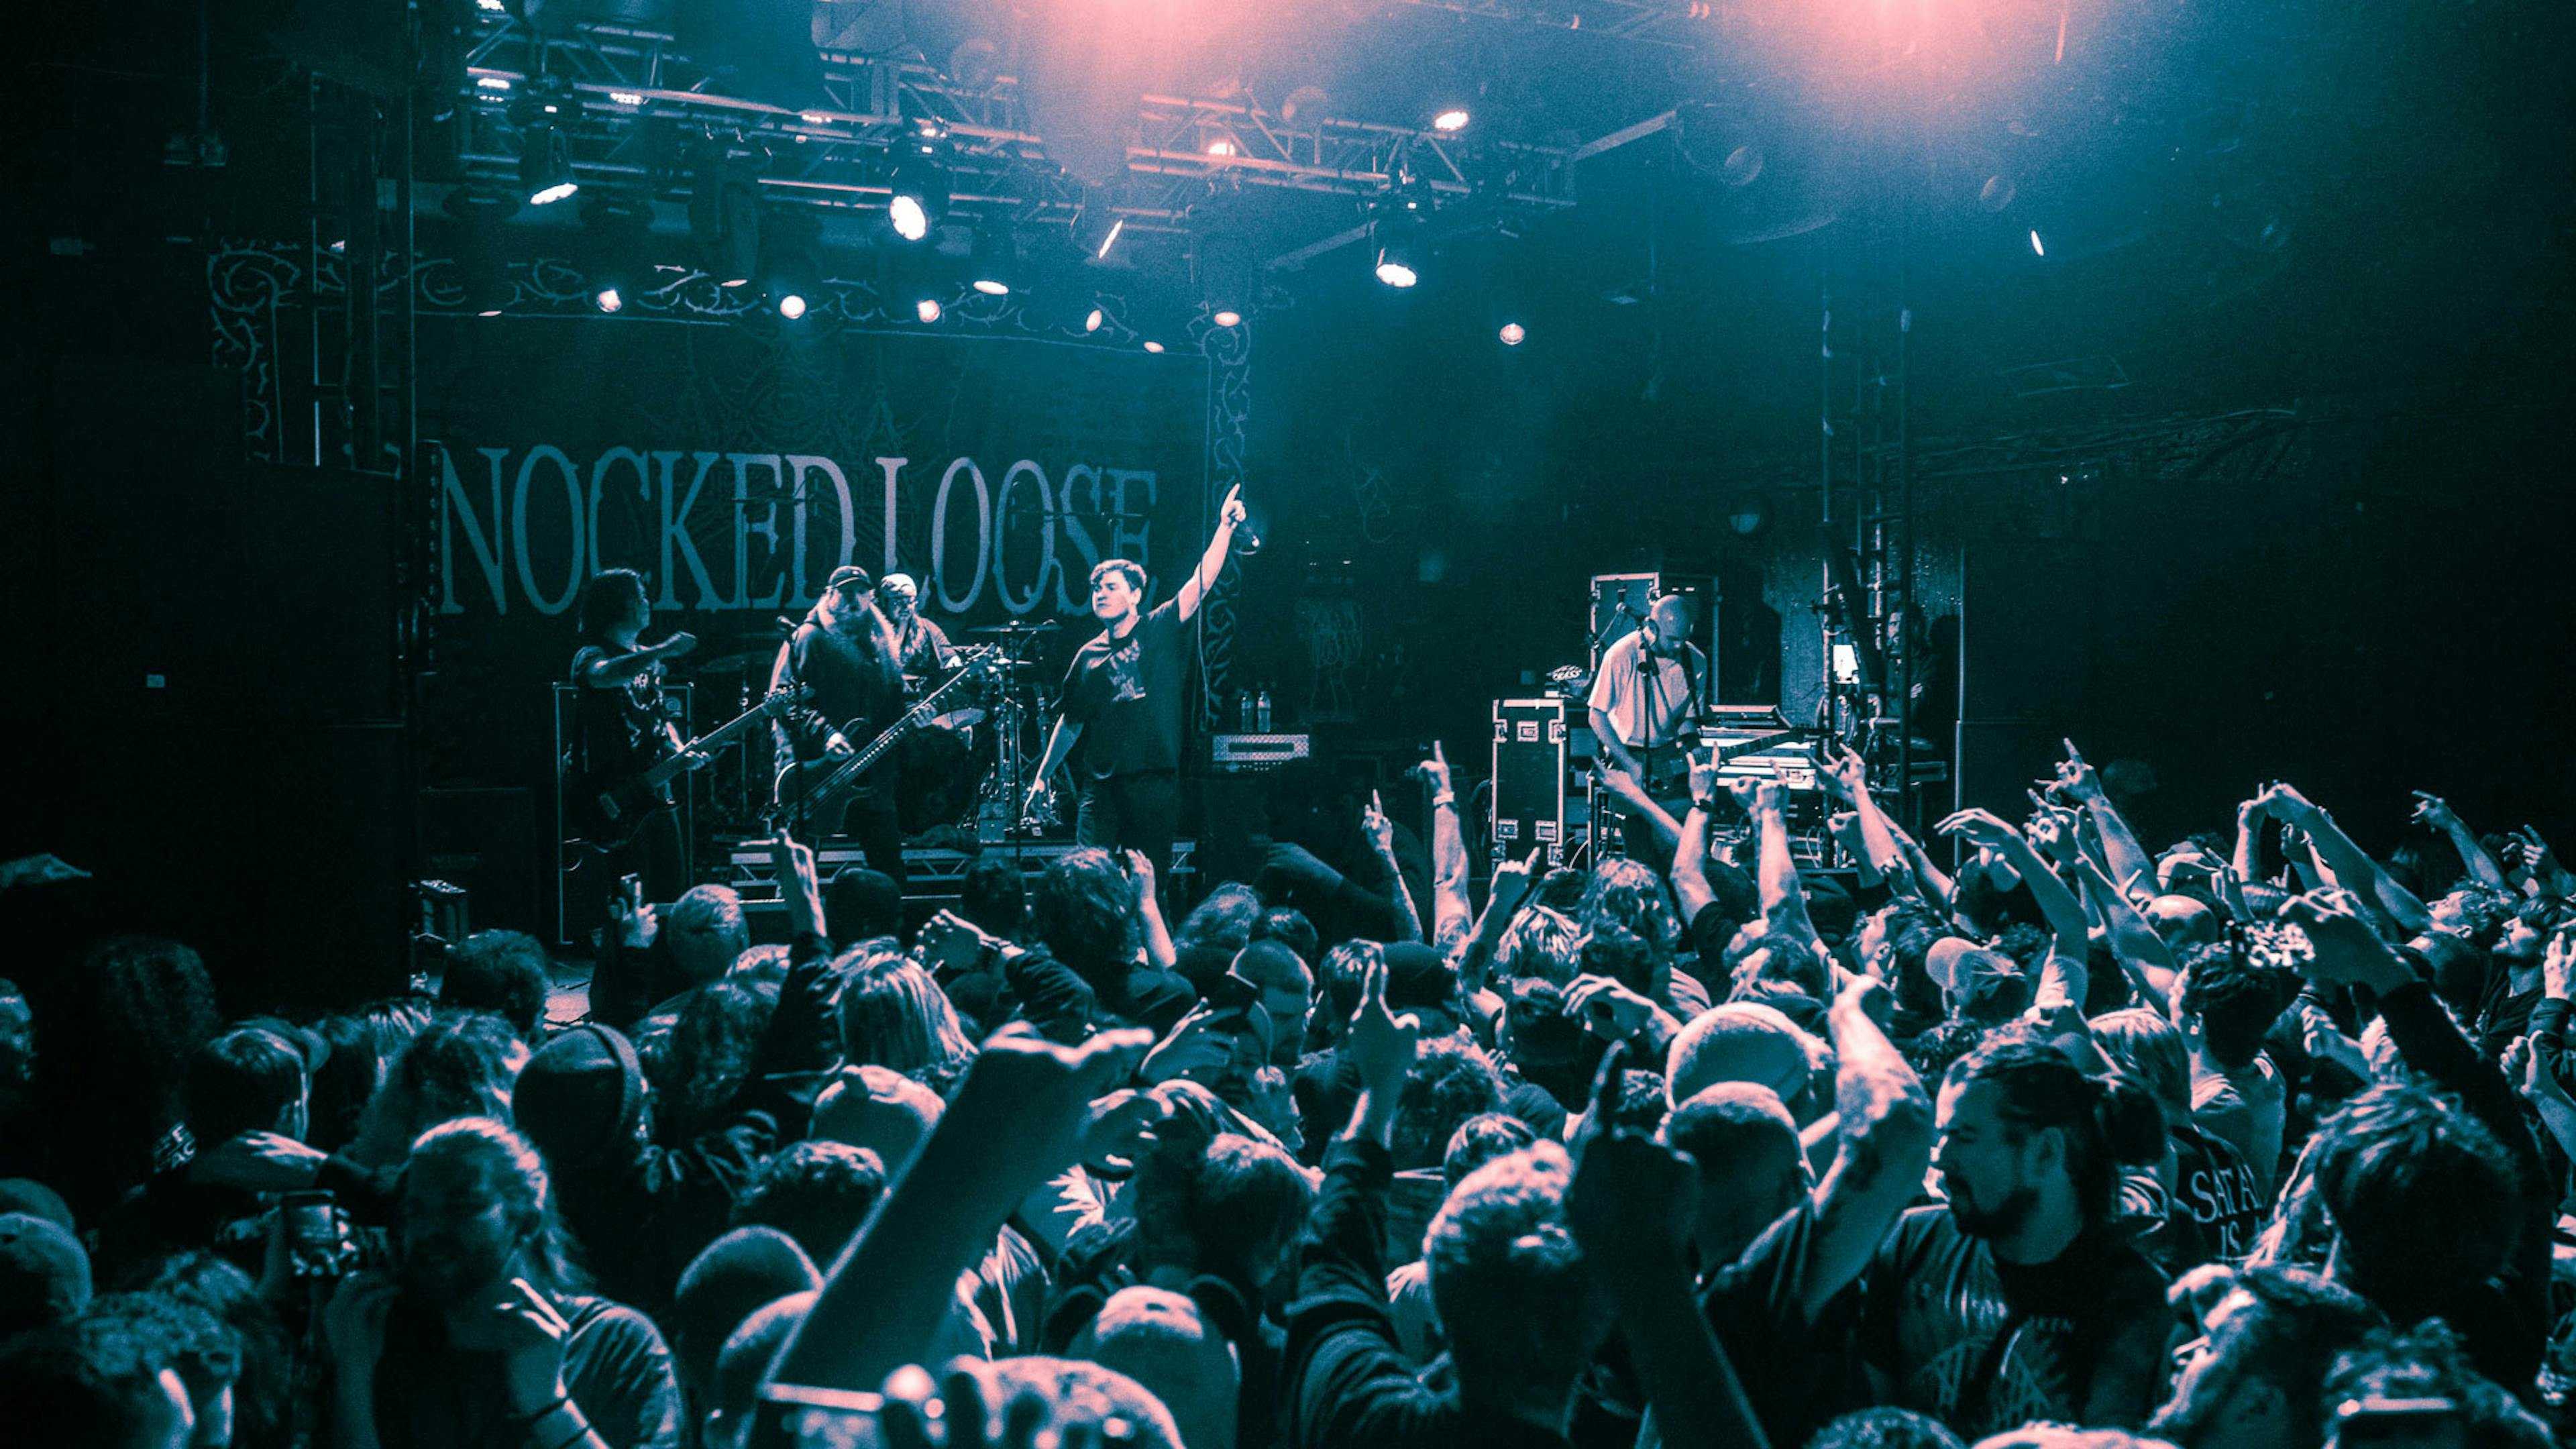 In pictures: Knocked Loose and Terror bring the mosh to London